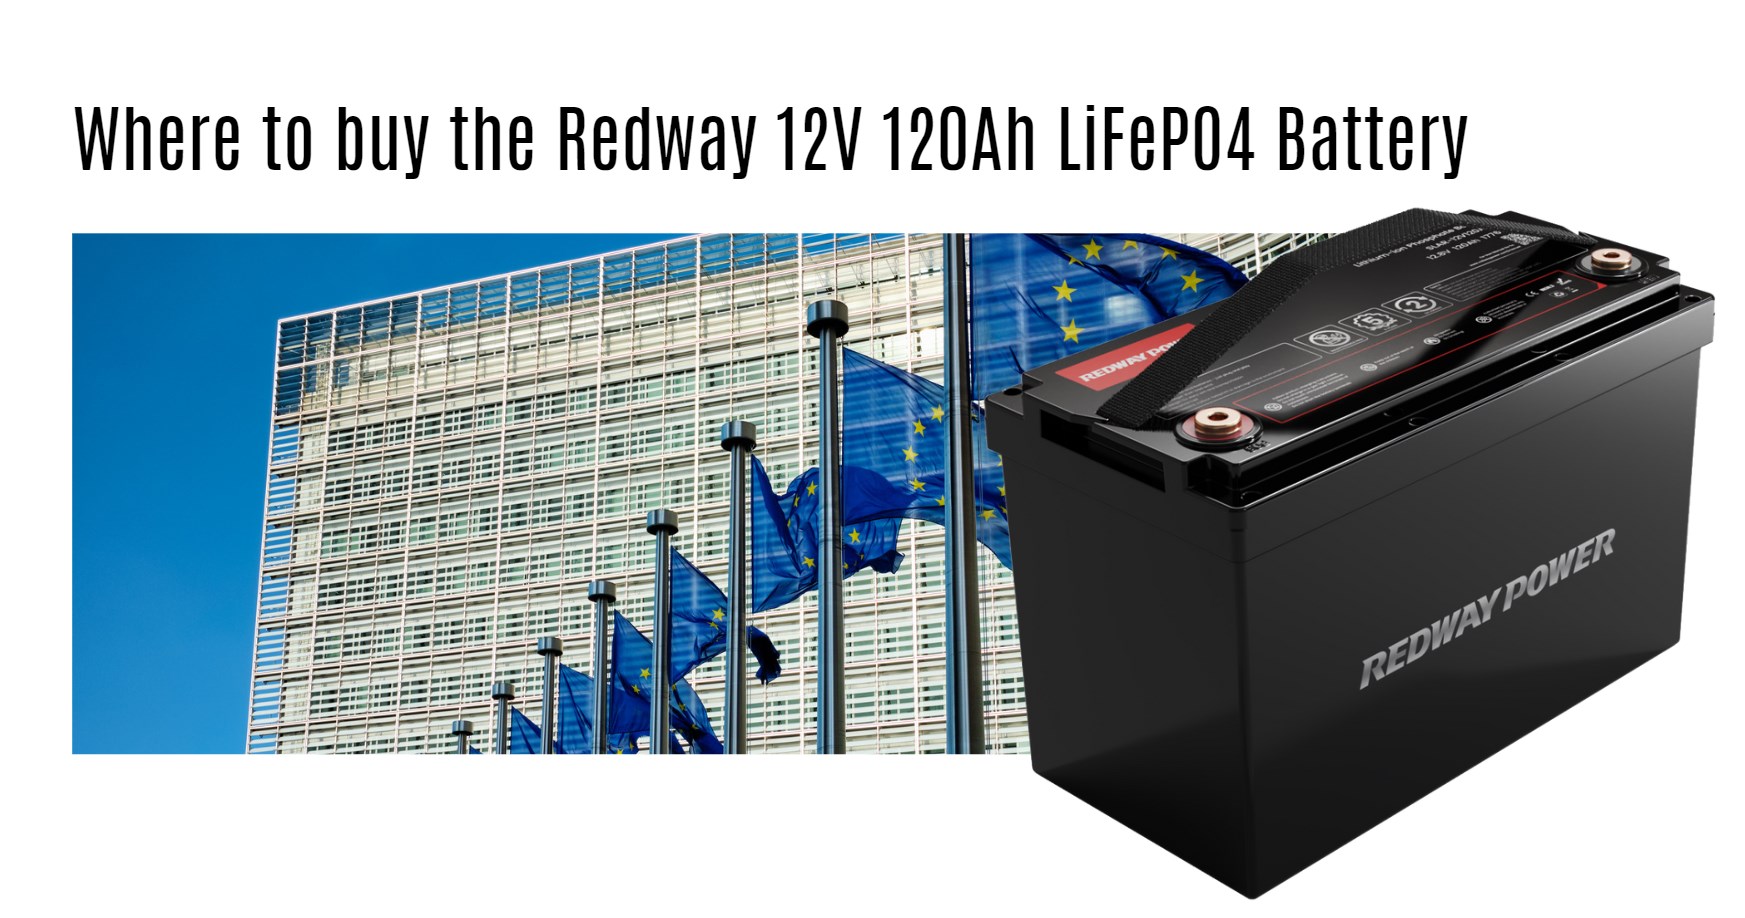 Where to buy the Redway 12V 120Ah LiFePO4 Battery